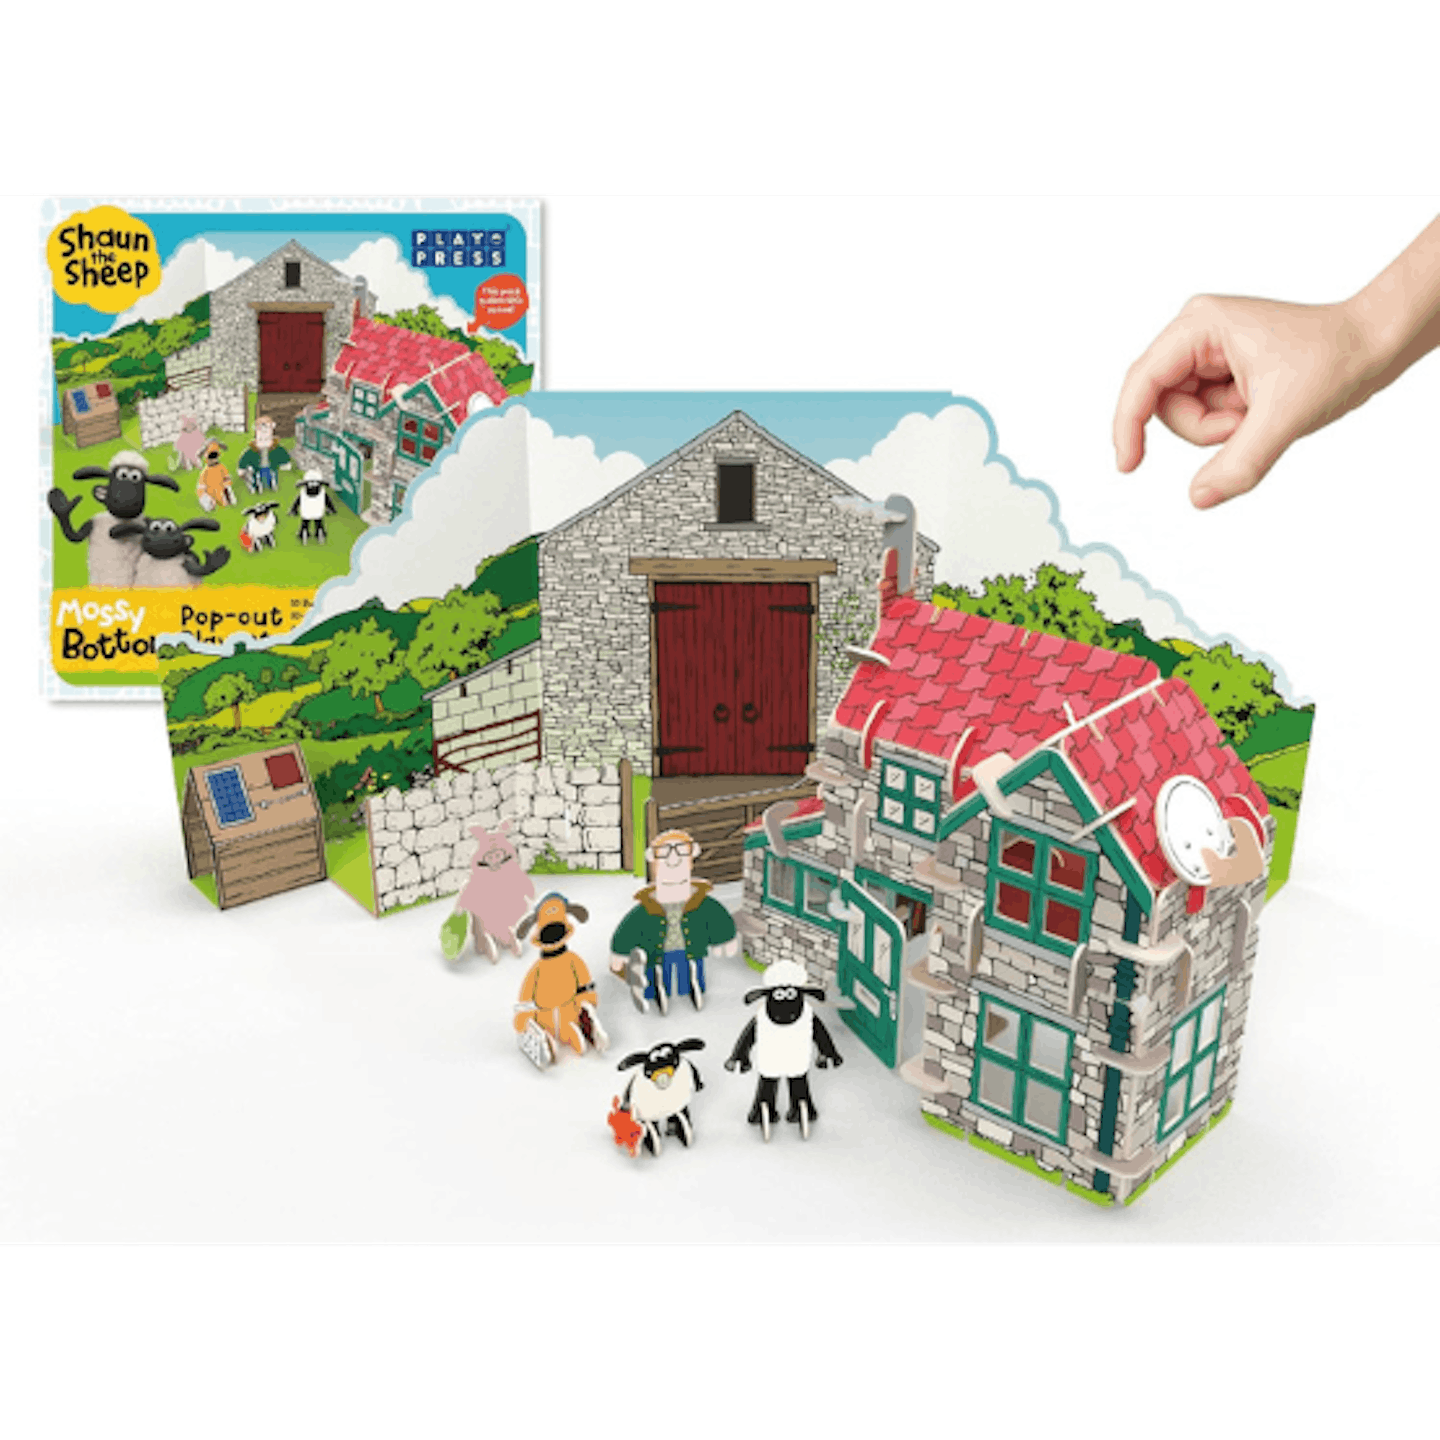 Shaun the Sheep pop out playset